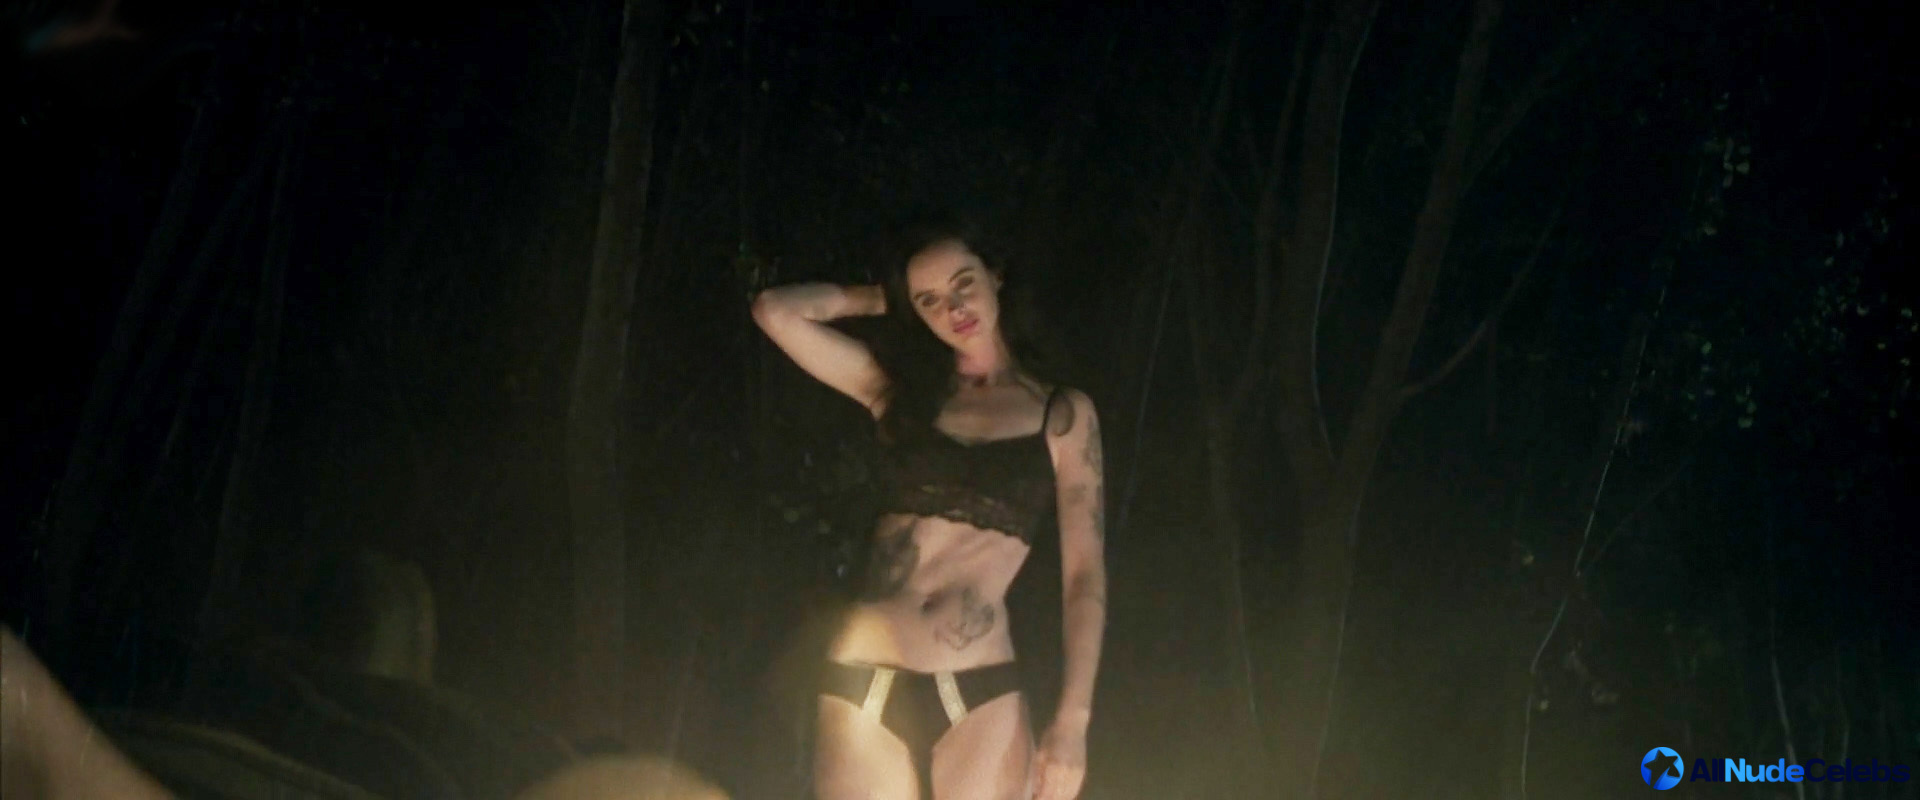 Krysten Ritter is not the type of celebrity to get naked in front of the ca...